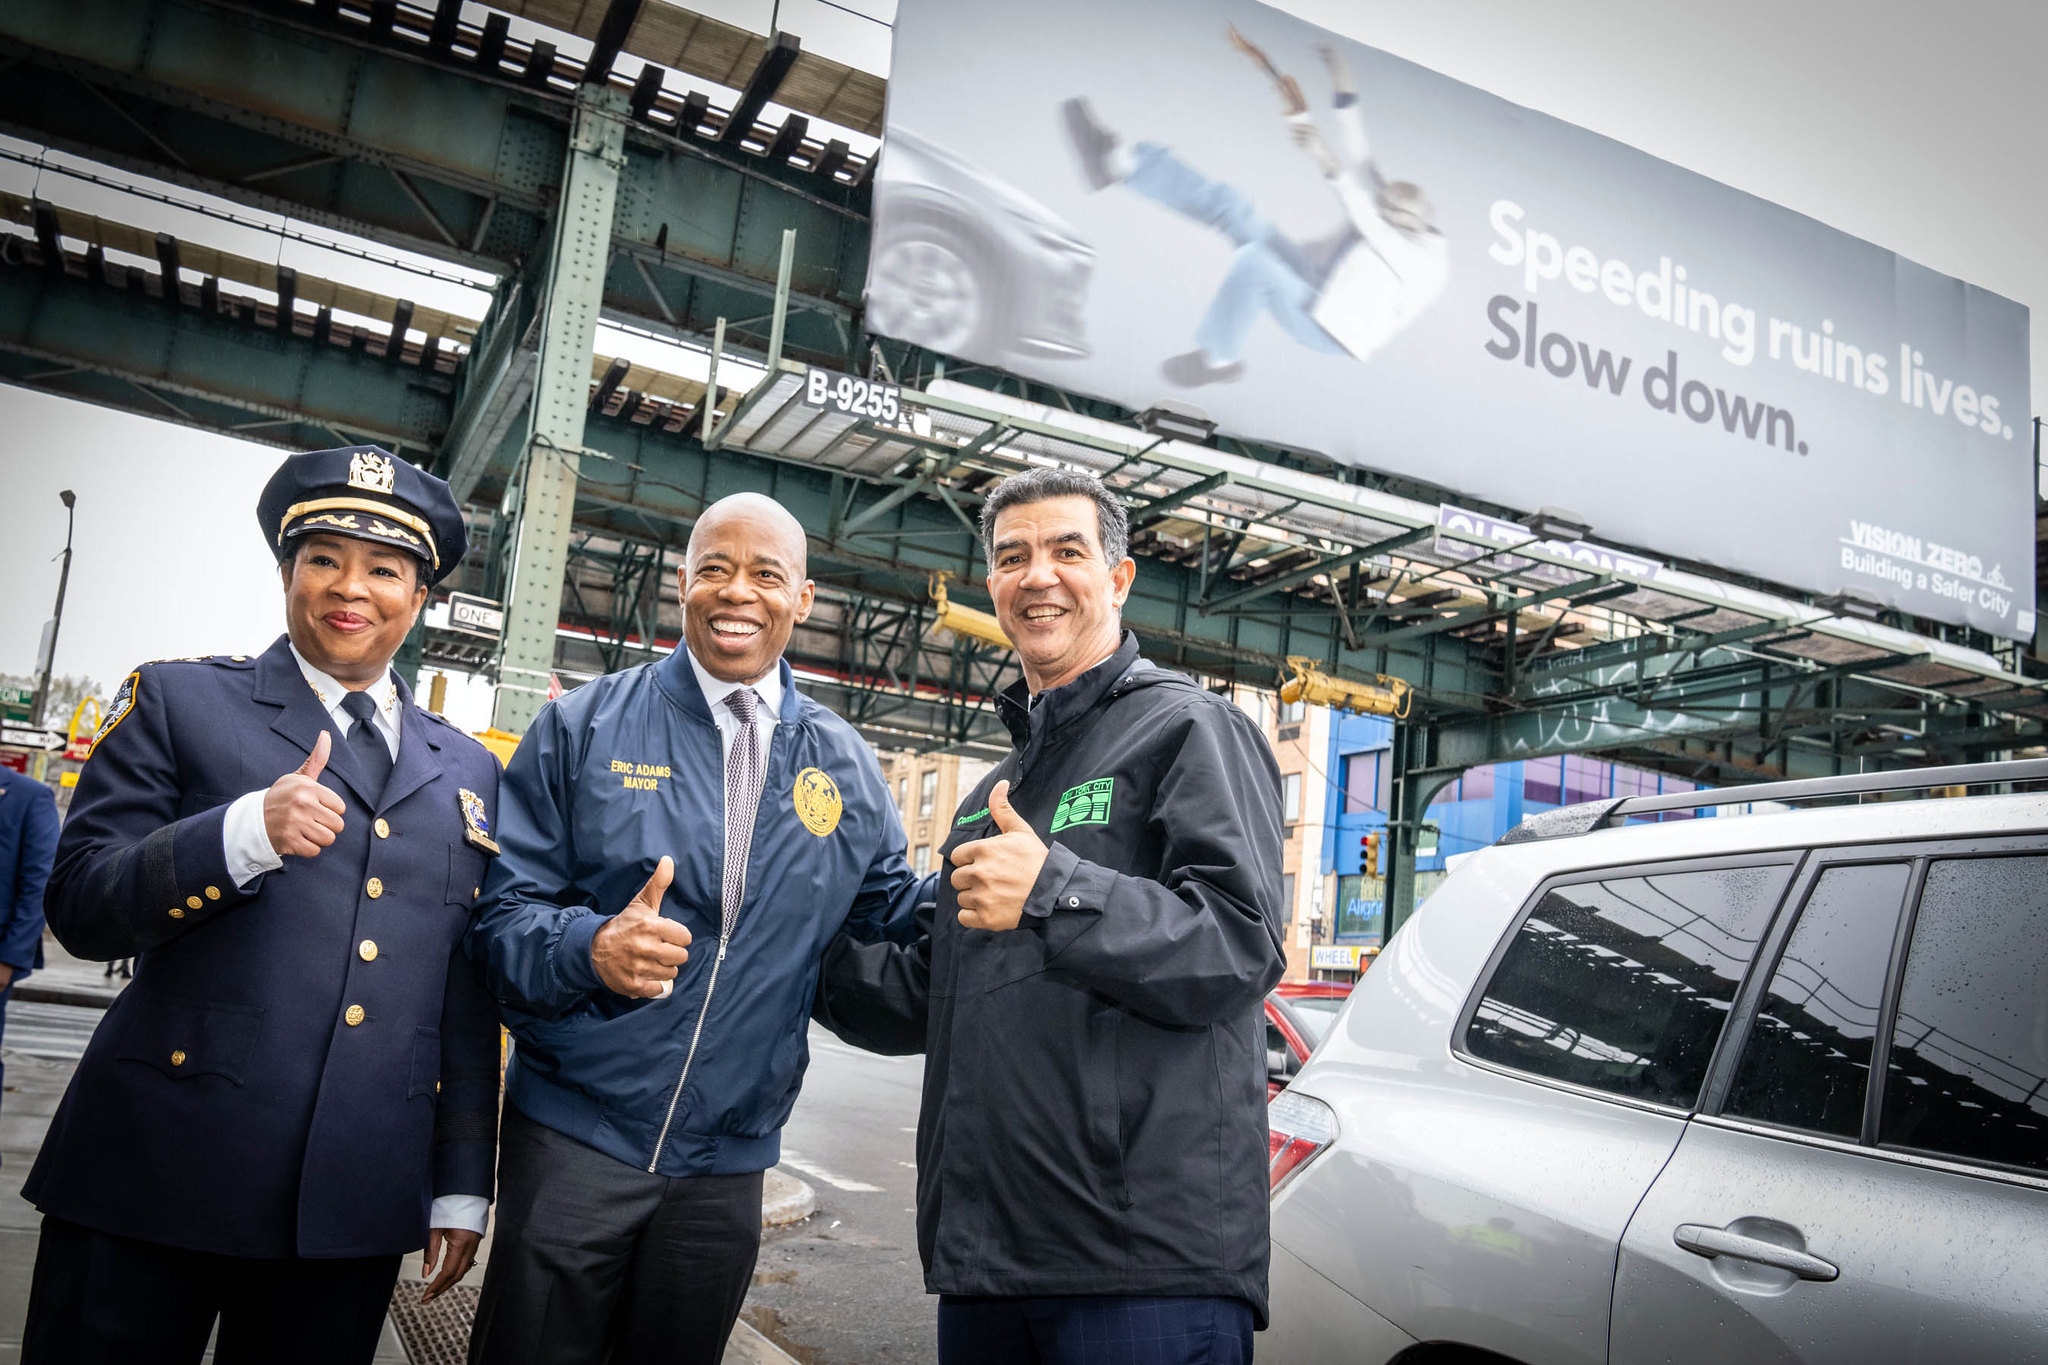 Mayor Eric Adams and New York City Department of Transportation (DOT) Commissioner Ydanis Rodriguez launch a $4 million multi-platform, multilingual campaign to counter rising traffic violence and curb dangerous driving behaviors.